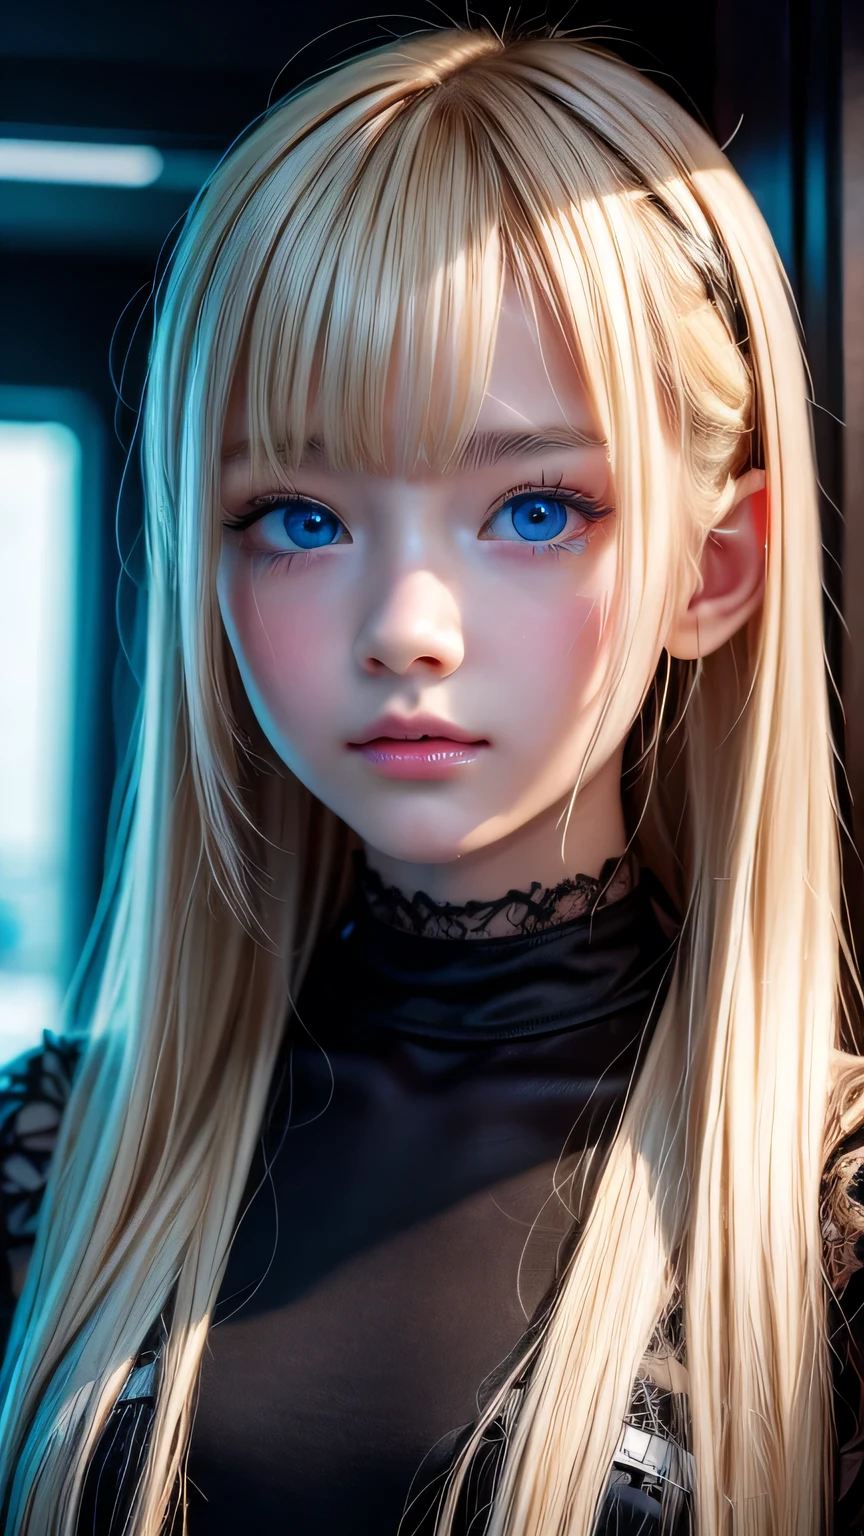 high quality, 最high quality, photo-Realistic, Raw photo, Realistic, ultra Realistic 8k cg, Ultra-detailed, High resolution, masterpiece, 1 Girl, Super long blonde hair, Super long natural platinum blonde hair, bangs over eyes、Very bright blue eyes, Face and eye details, close, Intricate details, Fine texture, In detail,Small Face Girl、16-year-old Nordic beauty